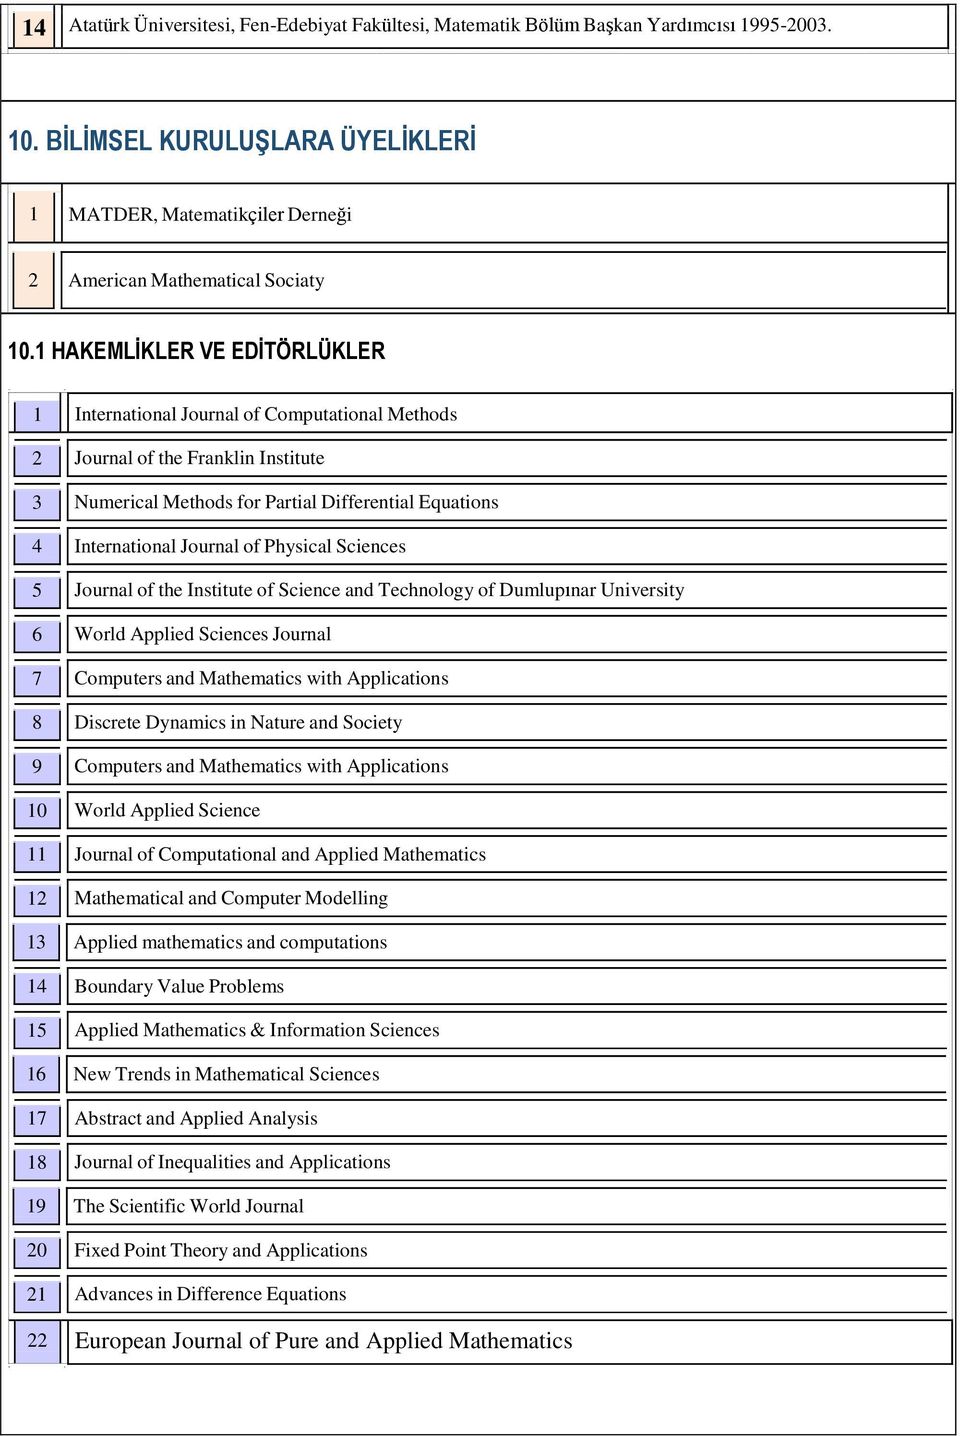 Physical Sciences Journal of the Institute of Science and Technology of Dumlupınar University World Applied Sciences Journal Computers and Mathematics with Applications Discrete Dynamics in Nature